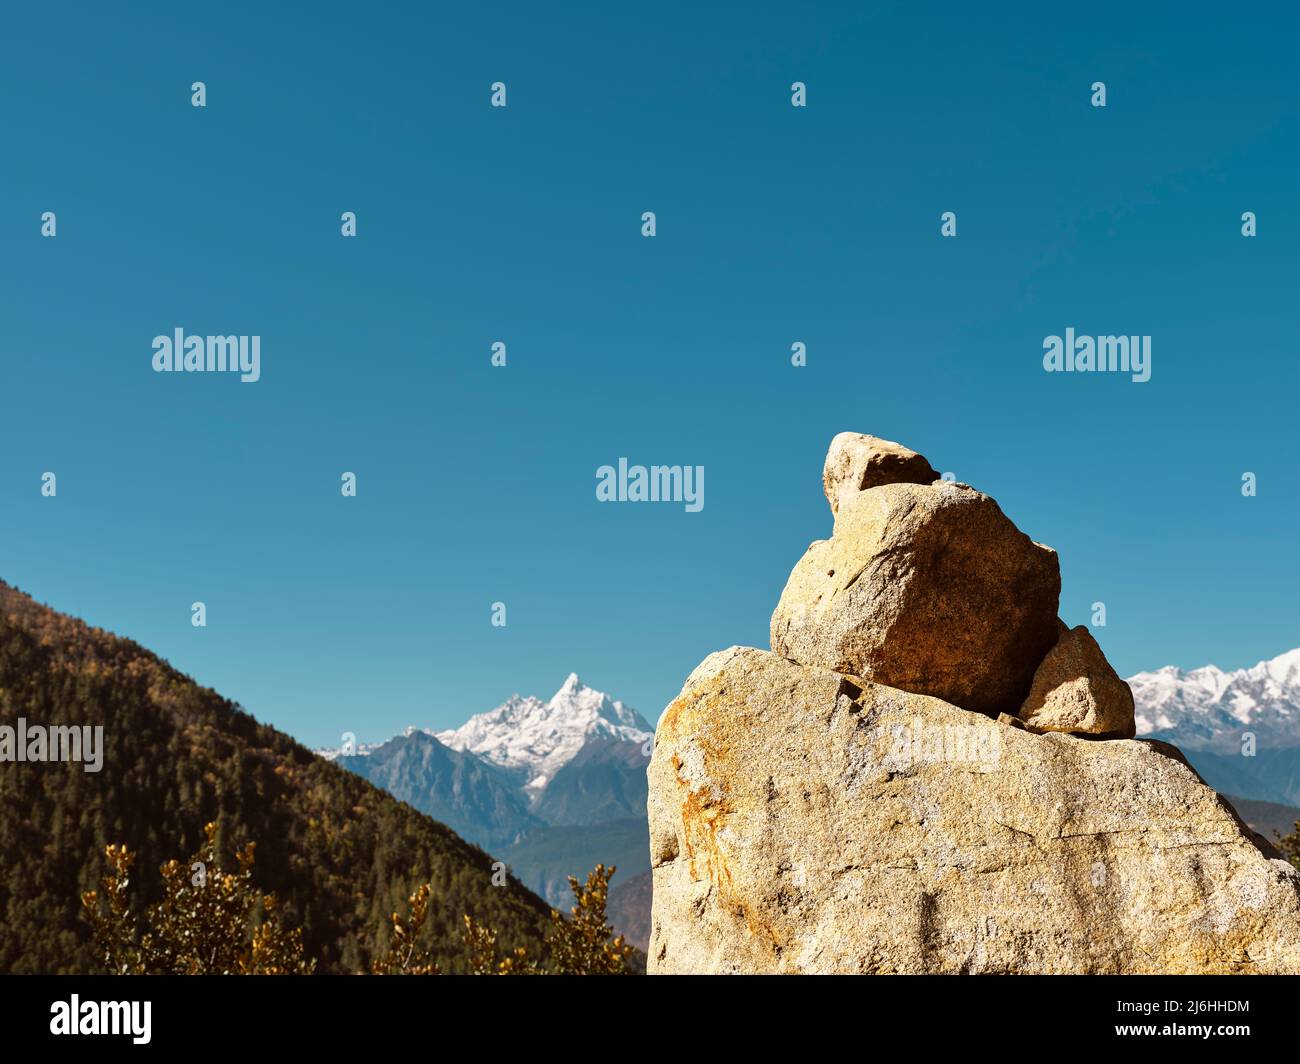 huge prayer stones under blue sky with snow capped meili mountain range in background, sichuan, china Stock Photo